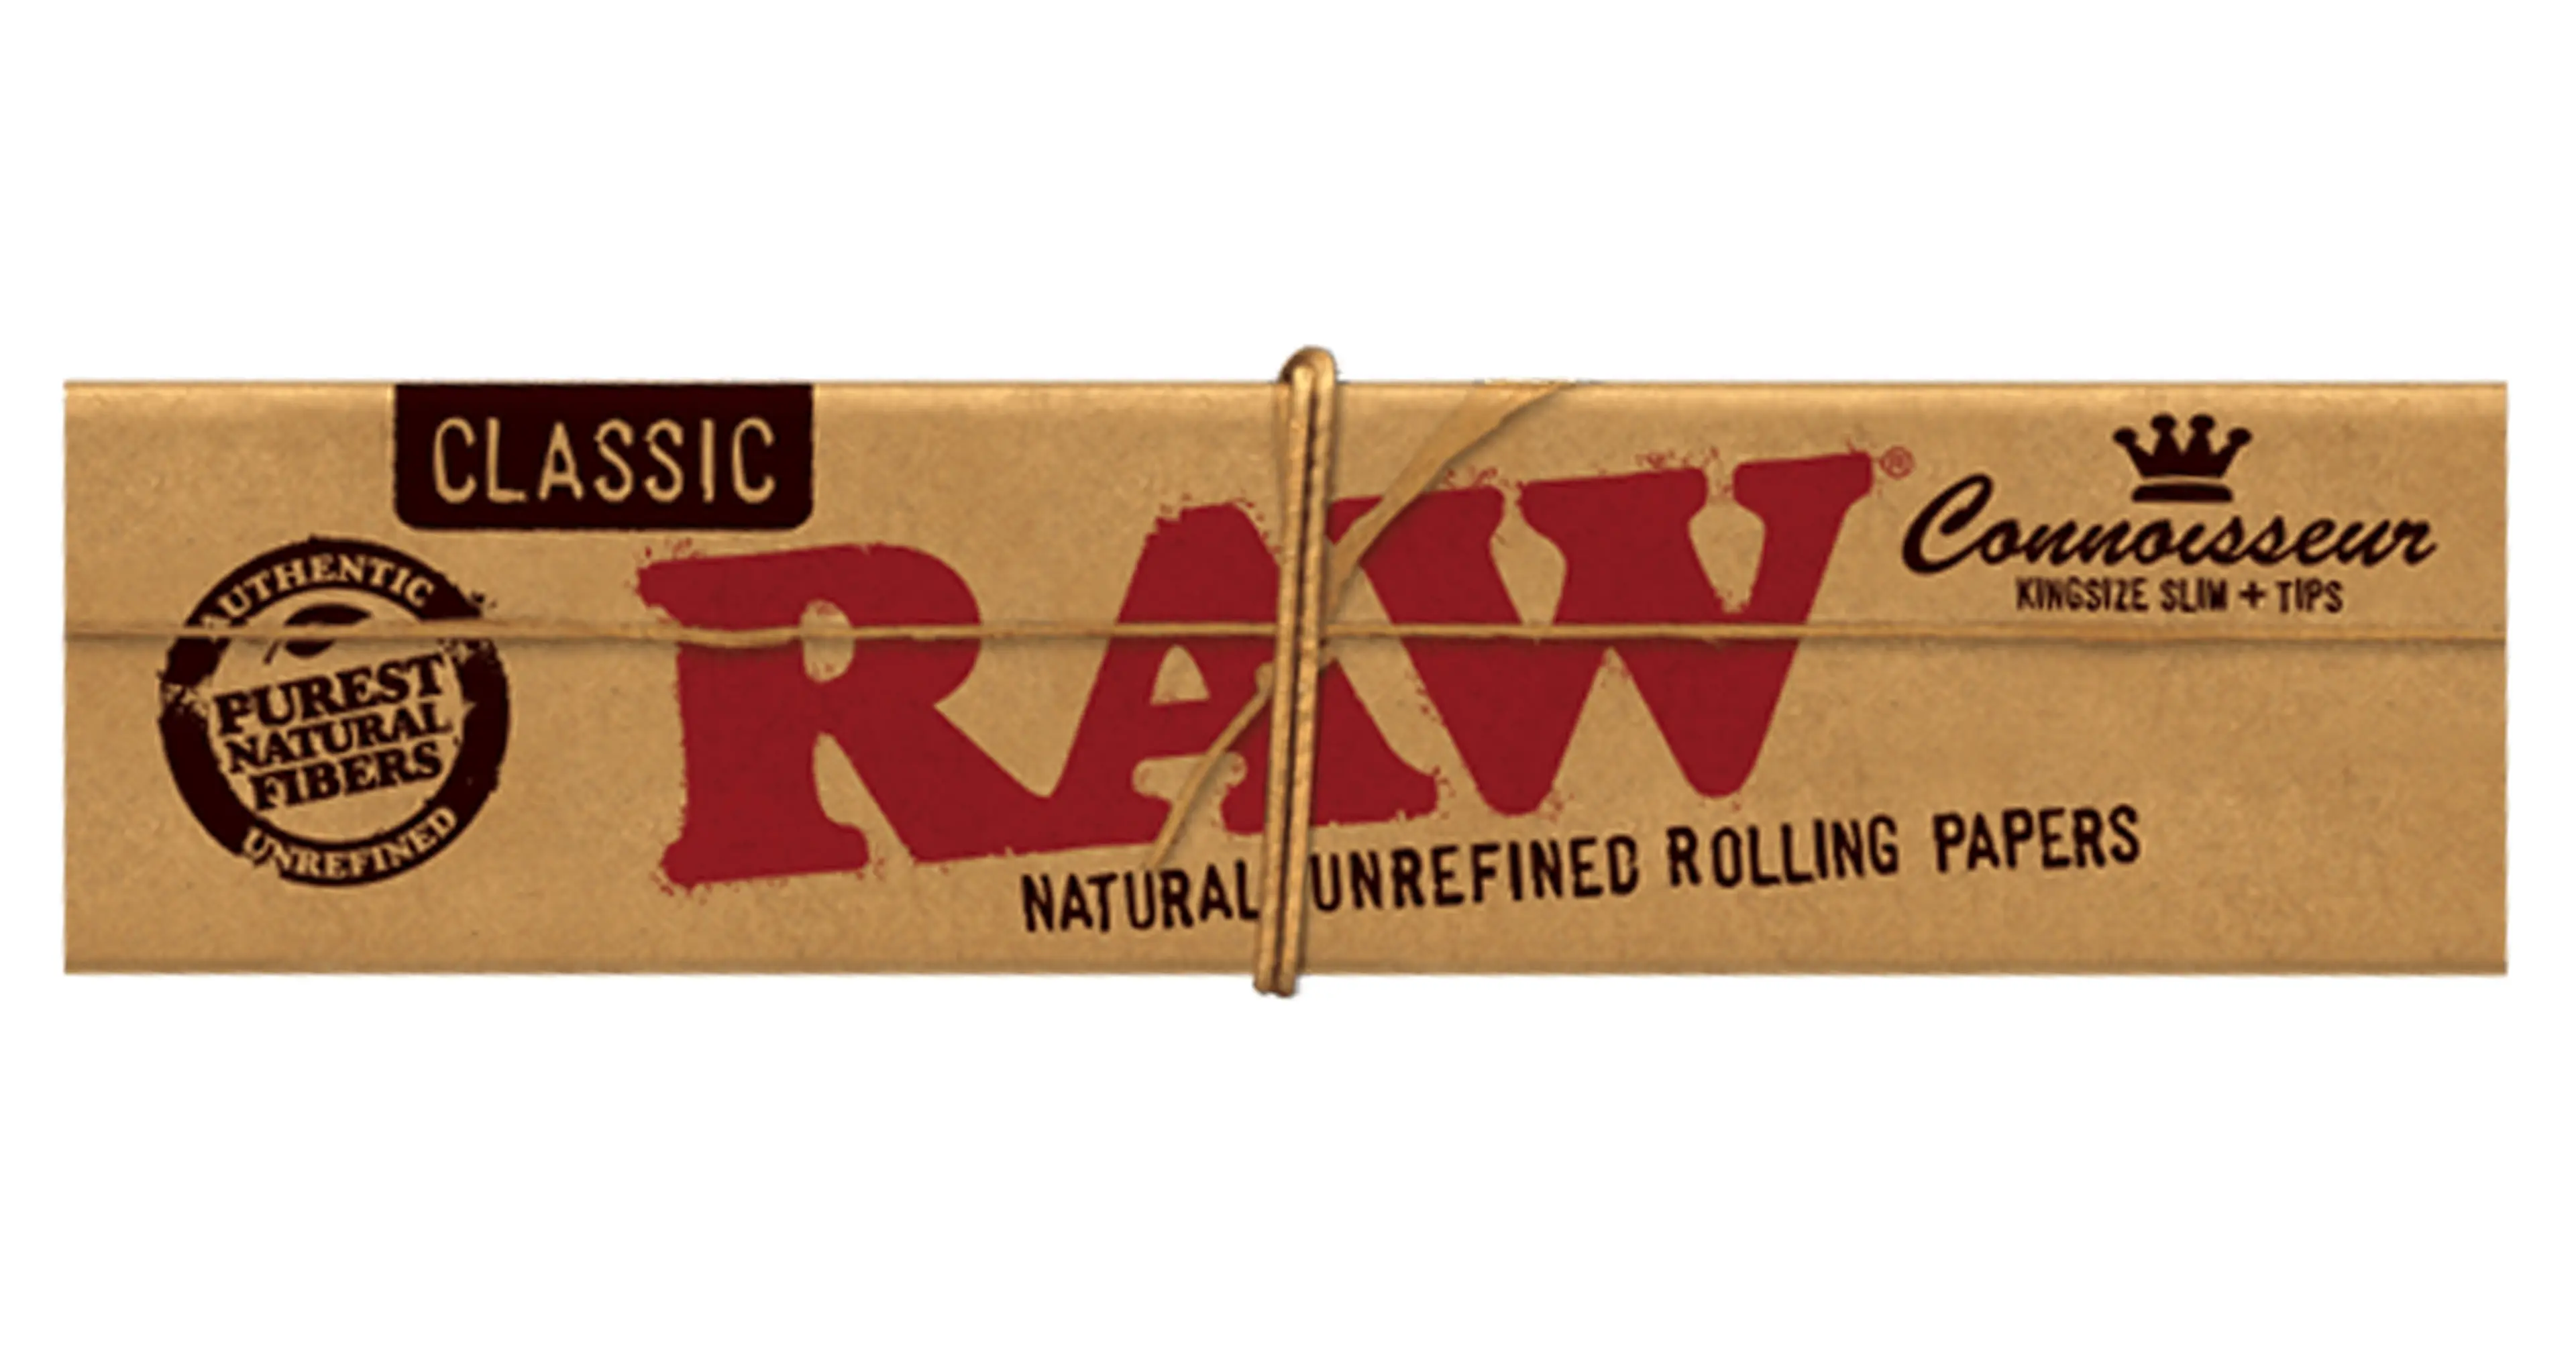 Connoisseur Kingsize Slim Classic Rolling Papers + Tips